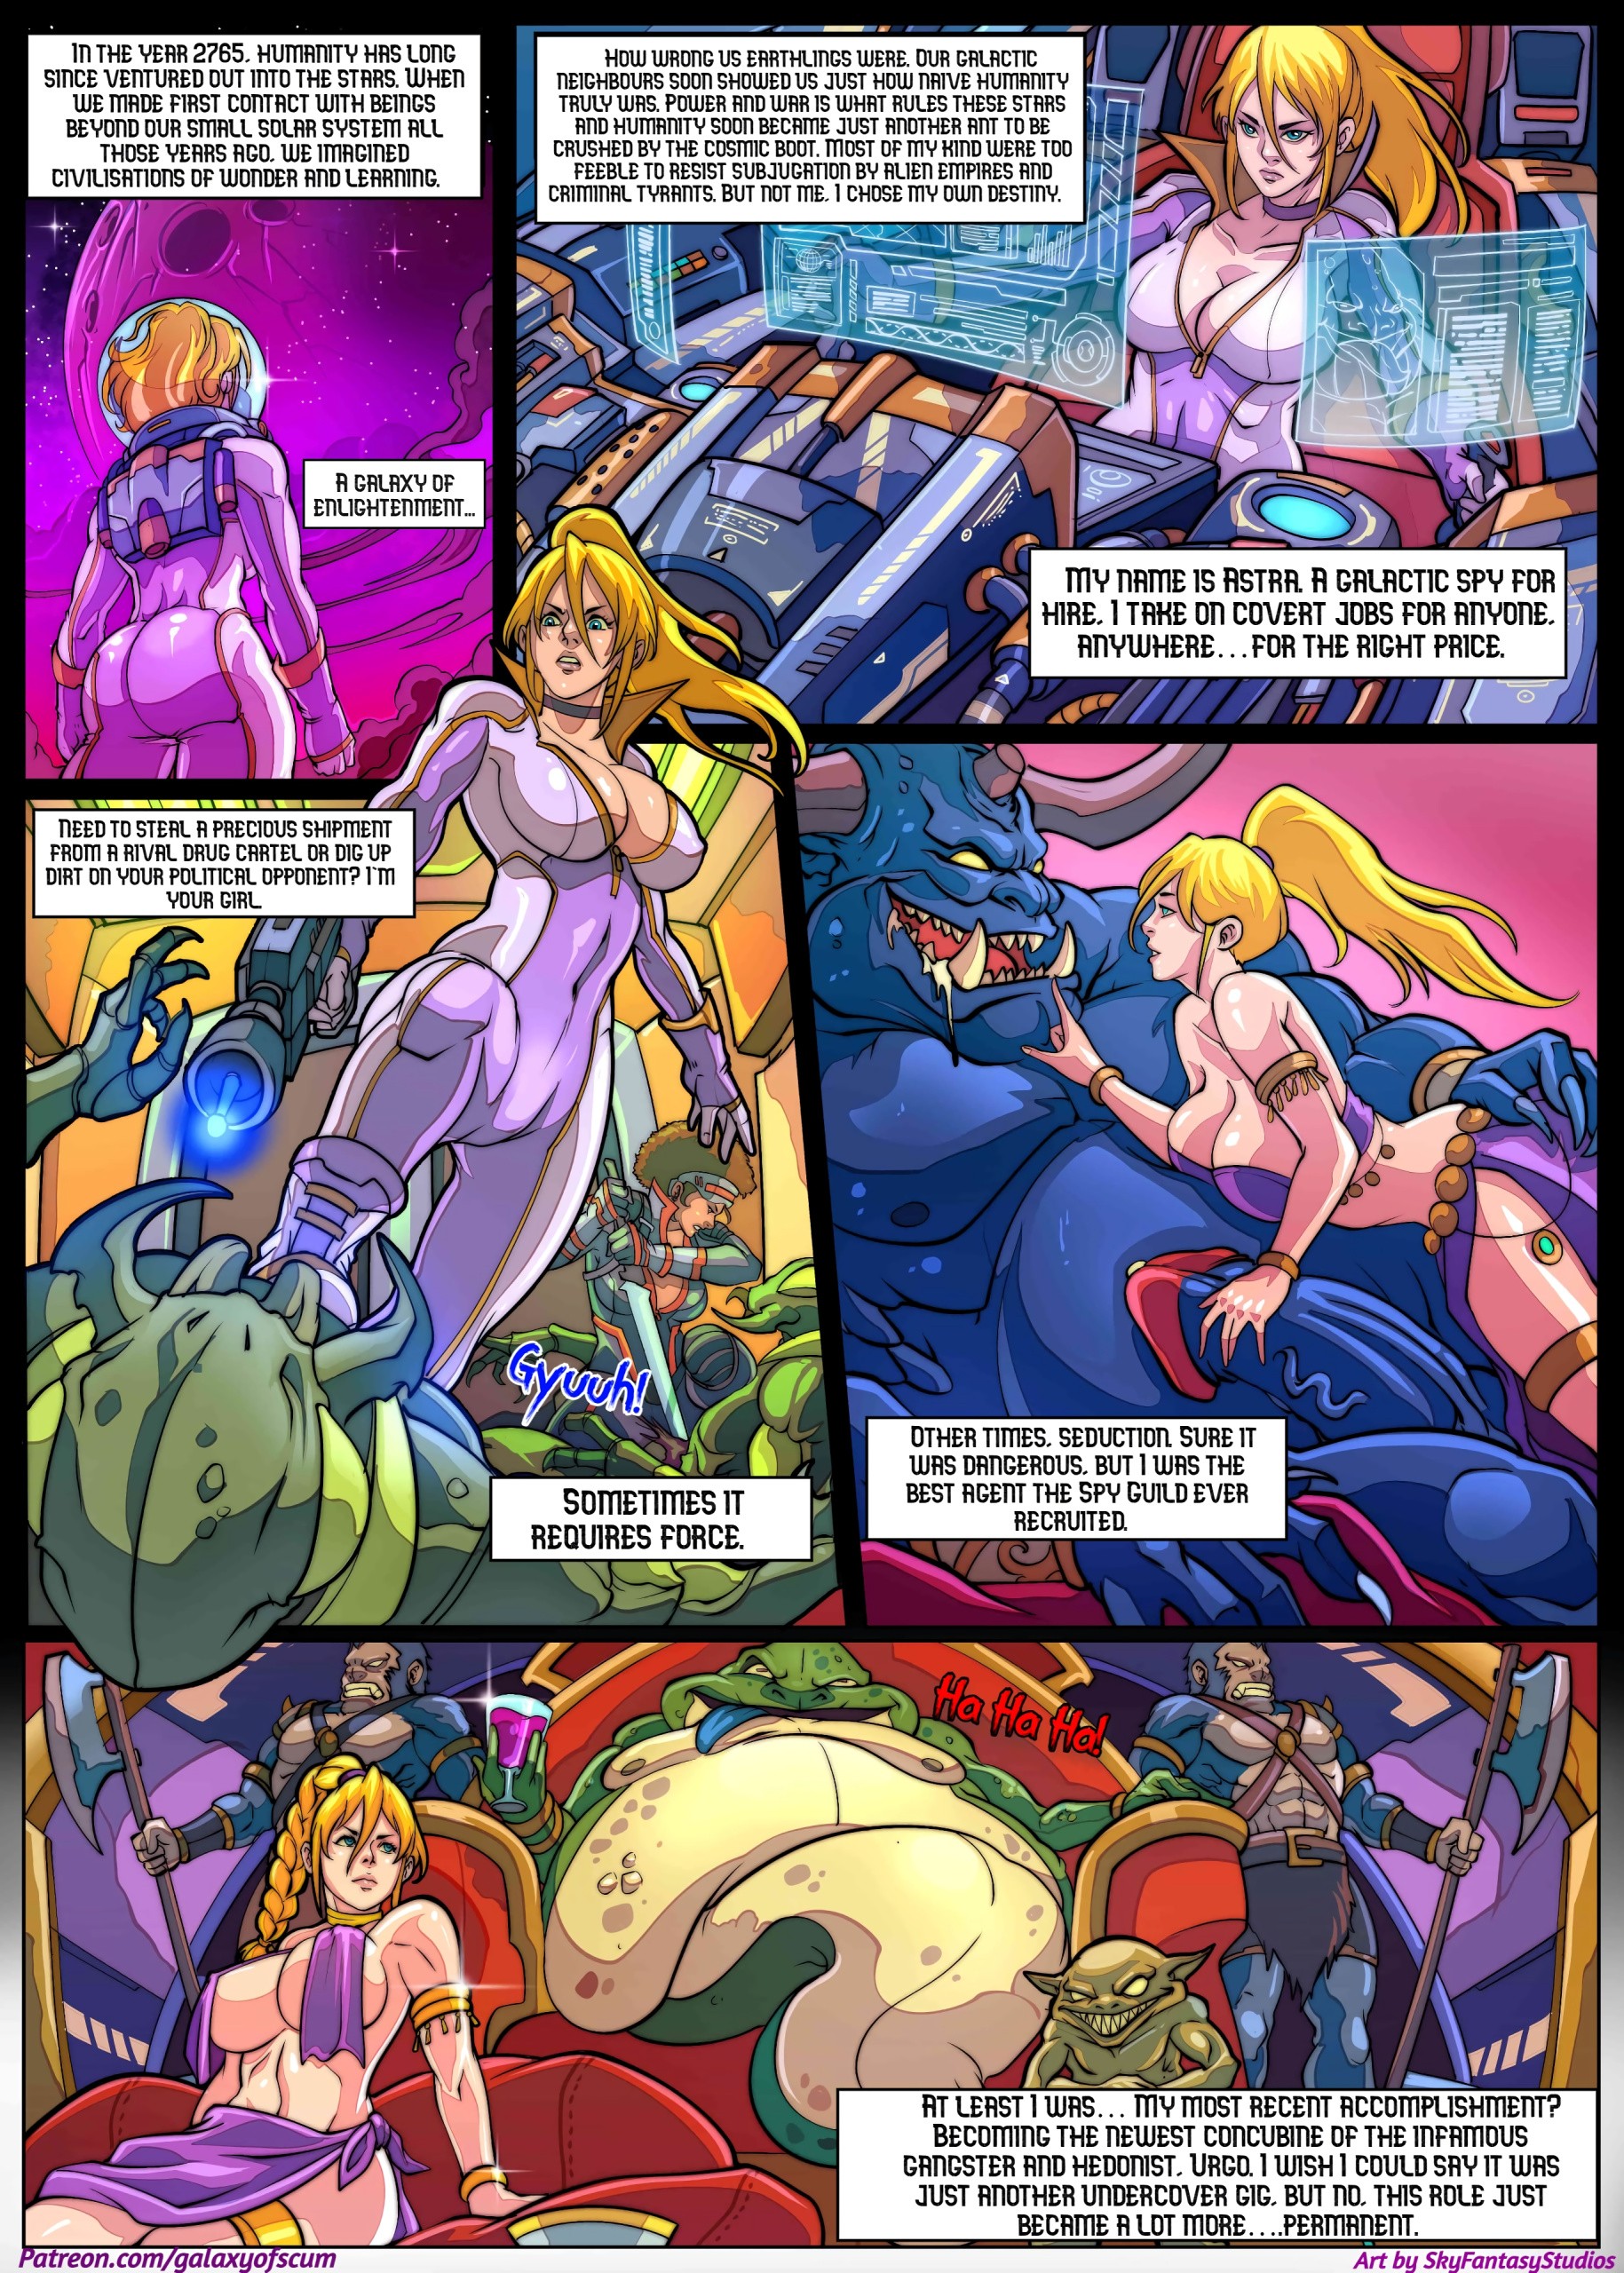 Galaxy of Scum Issue 1: Urgo's Palace porn comic picture 2